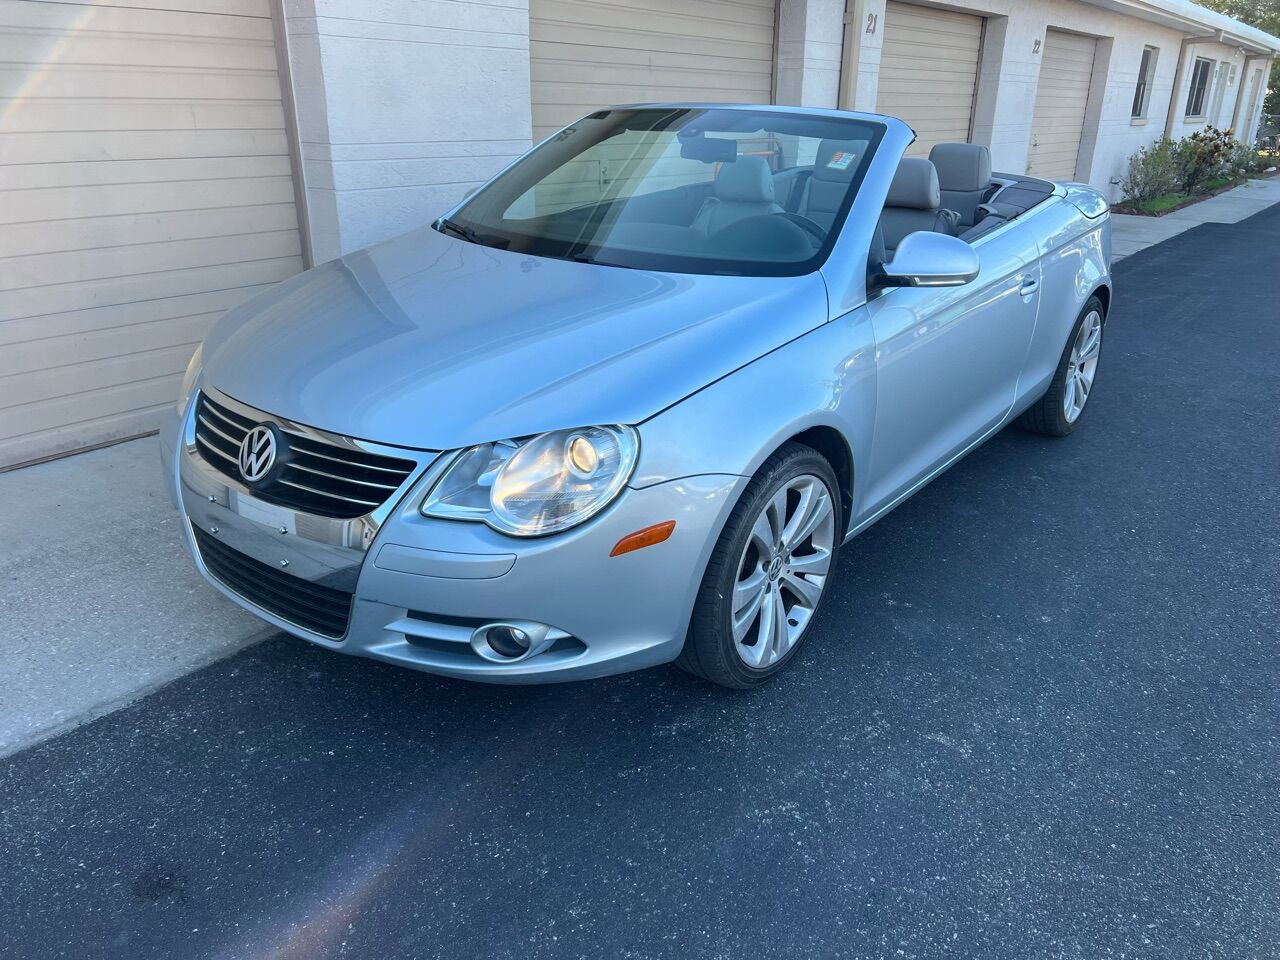 Used 2008 Volkswagen Eos for Sale Right Now - Autotrader